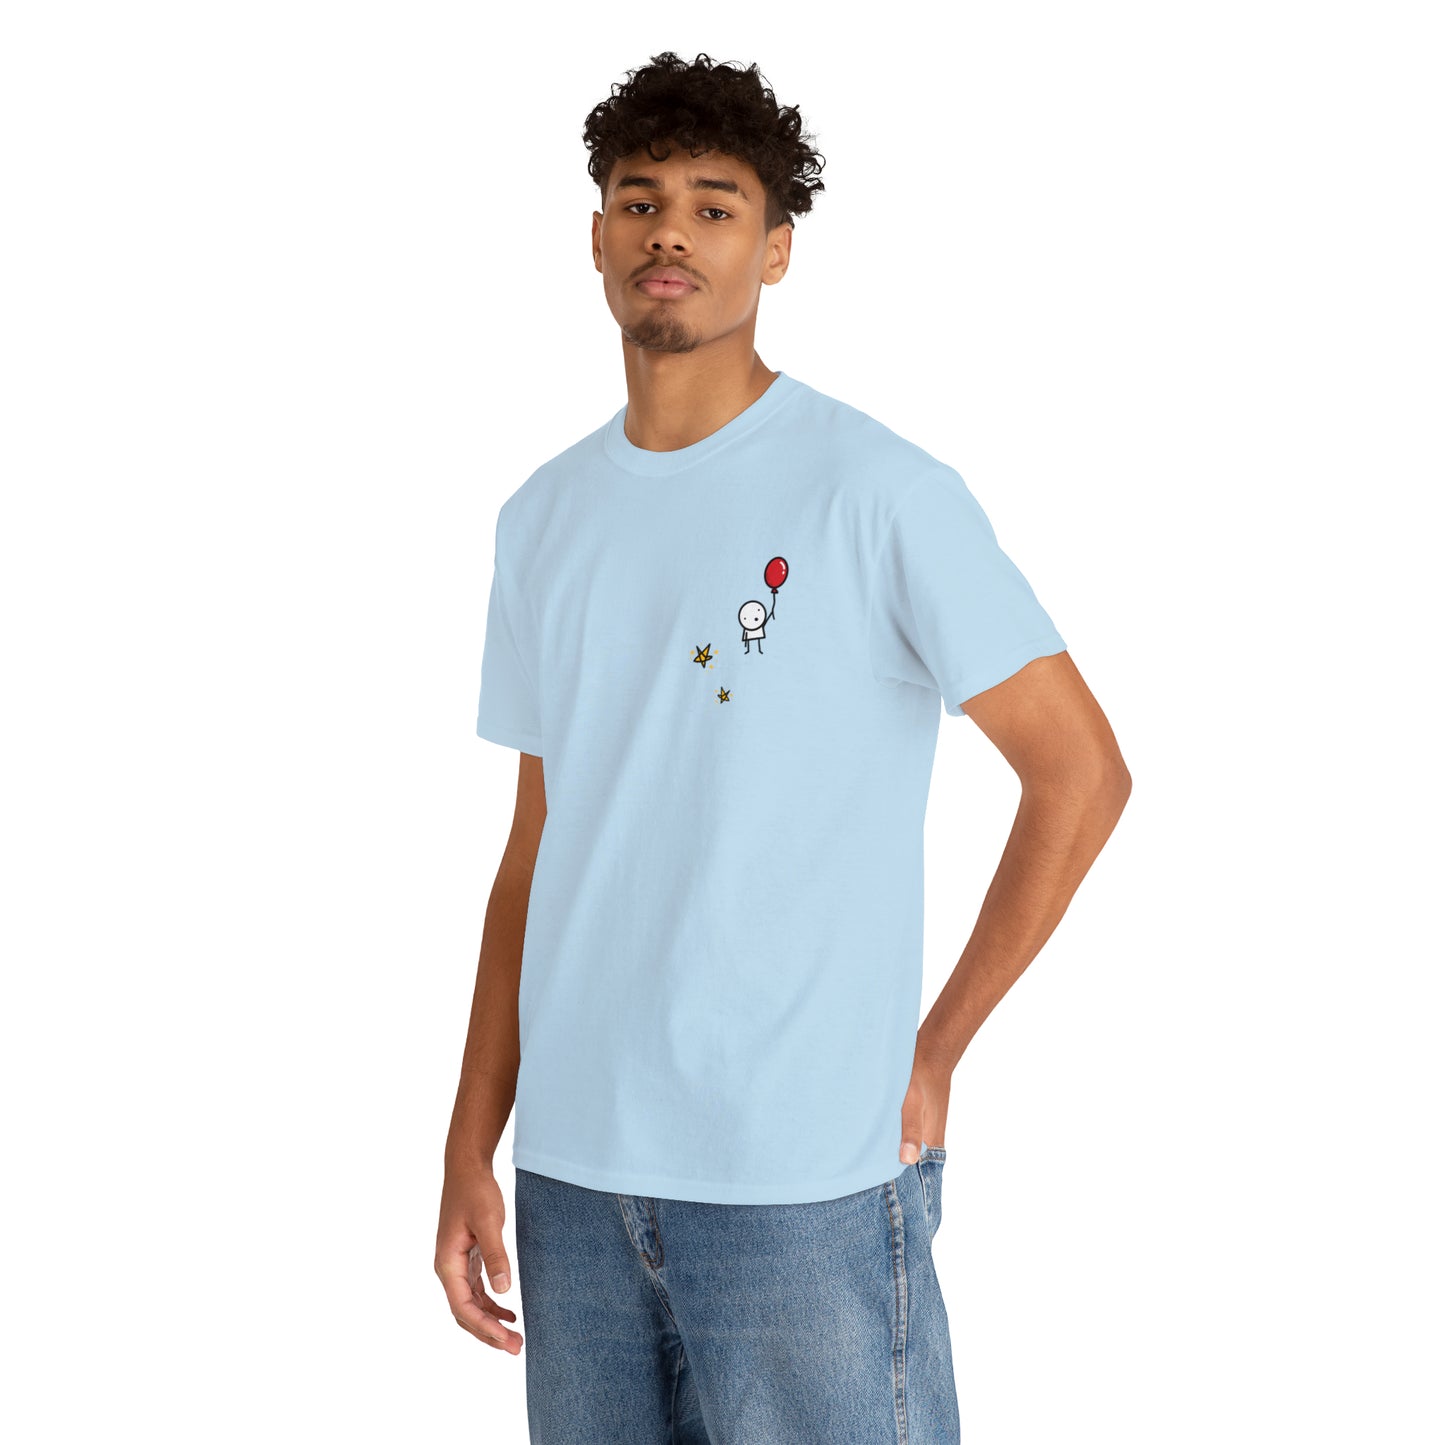 Boy with Balloon and Stars - Adult Heavy Cotton™ Tee